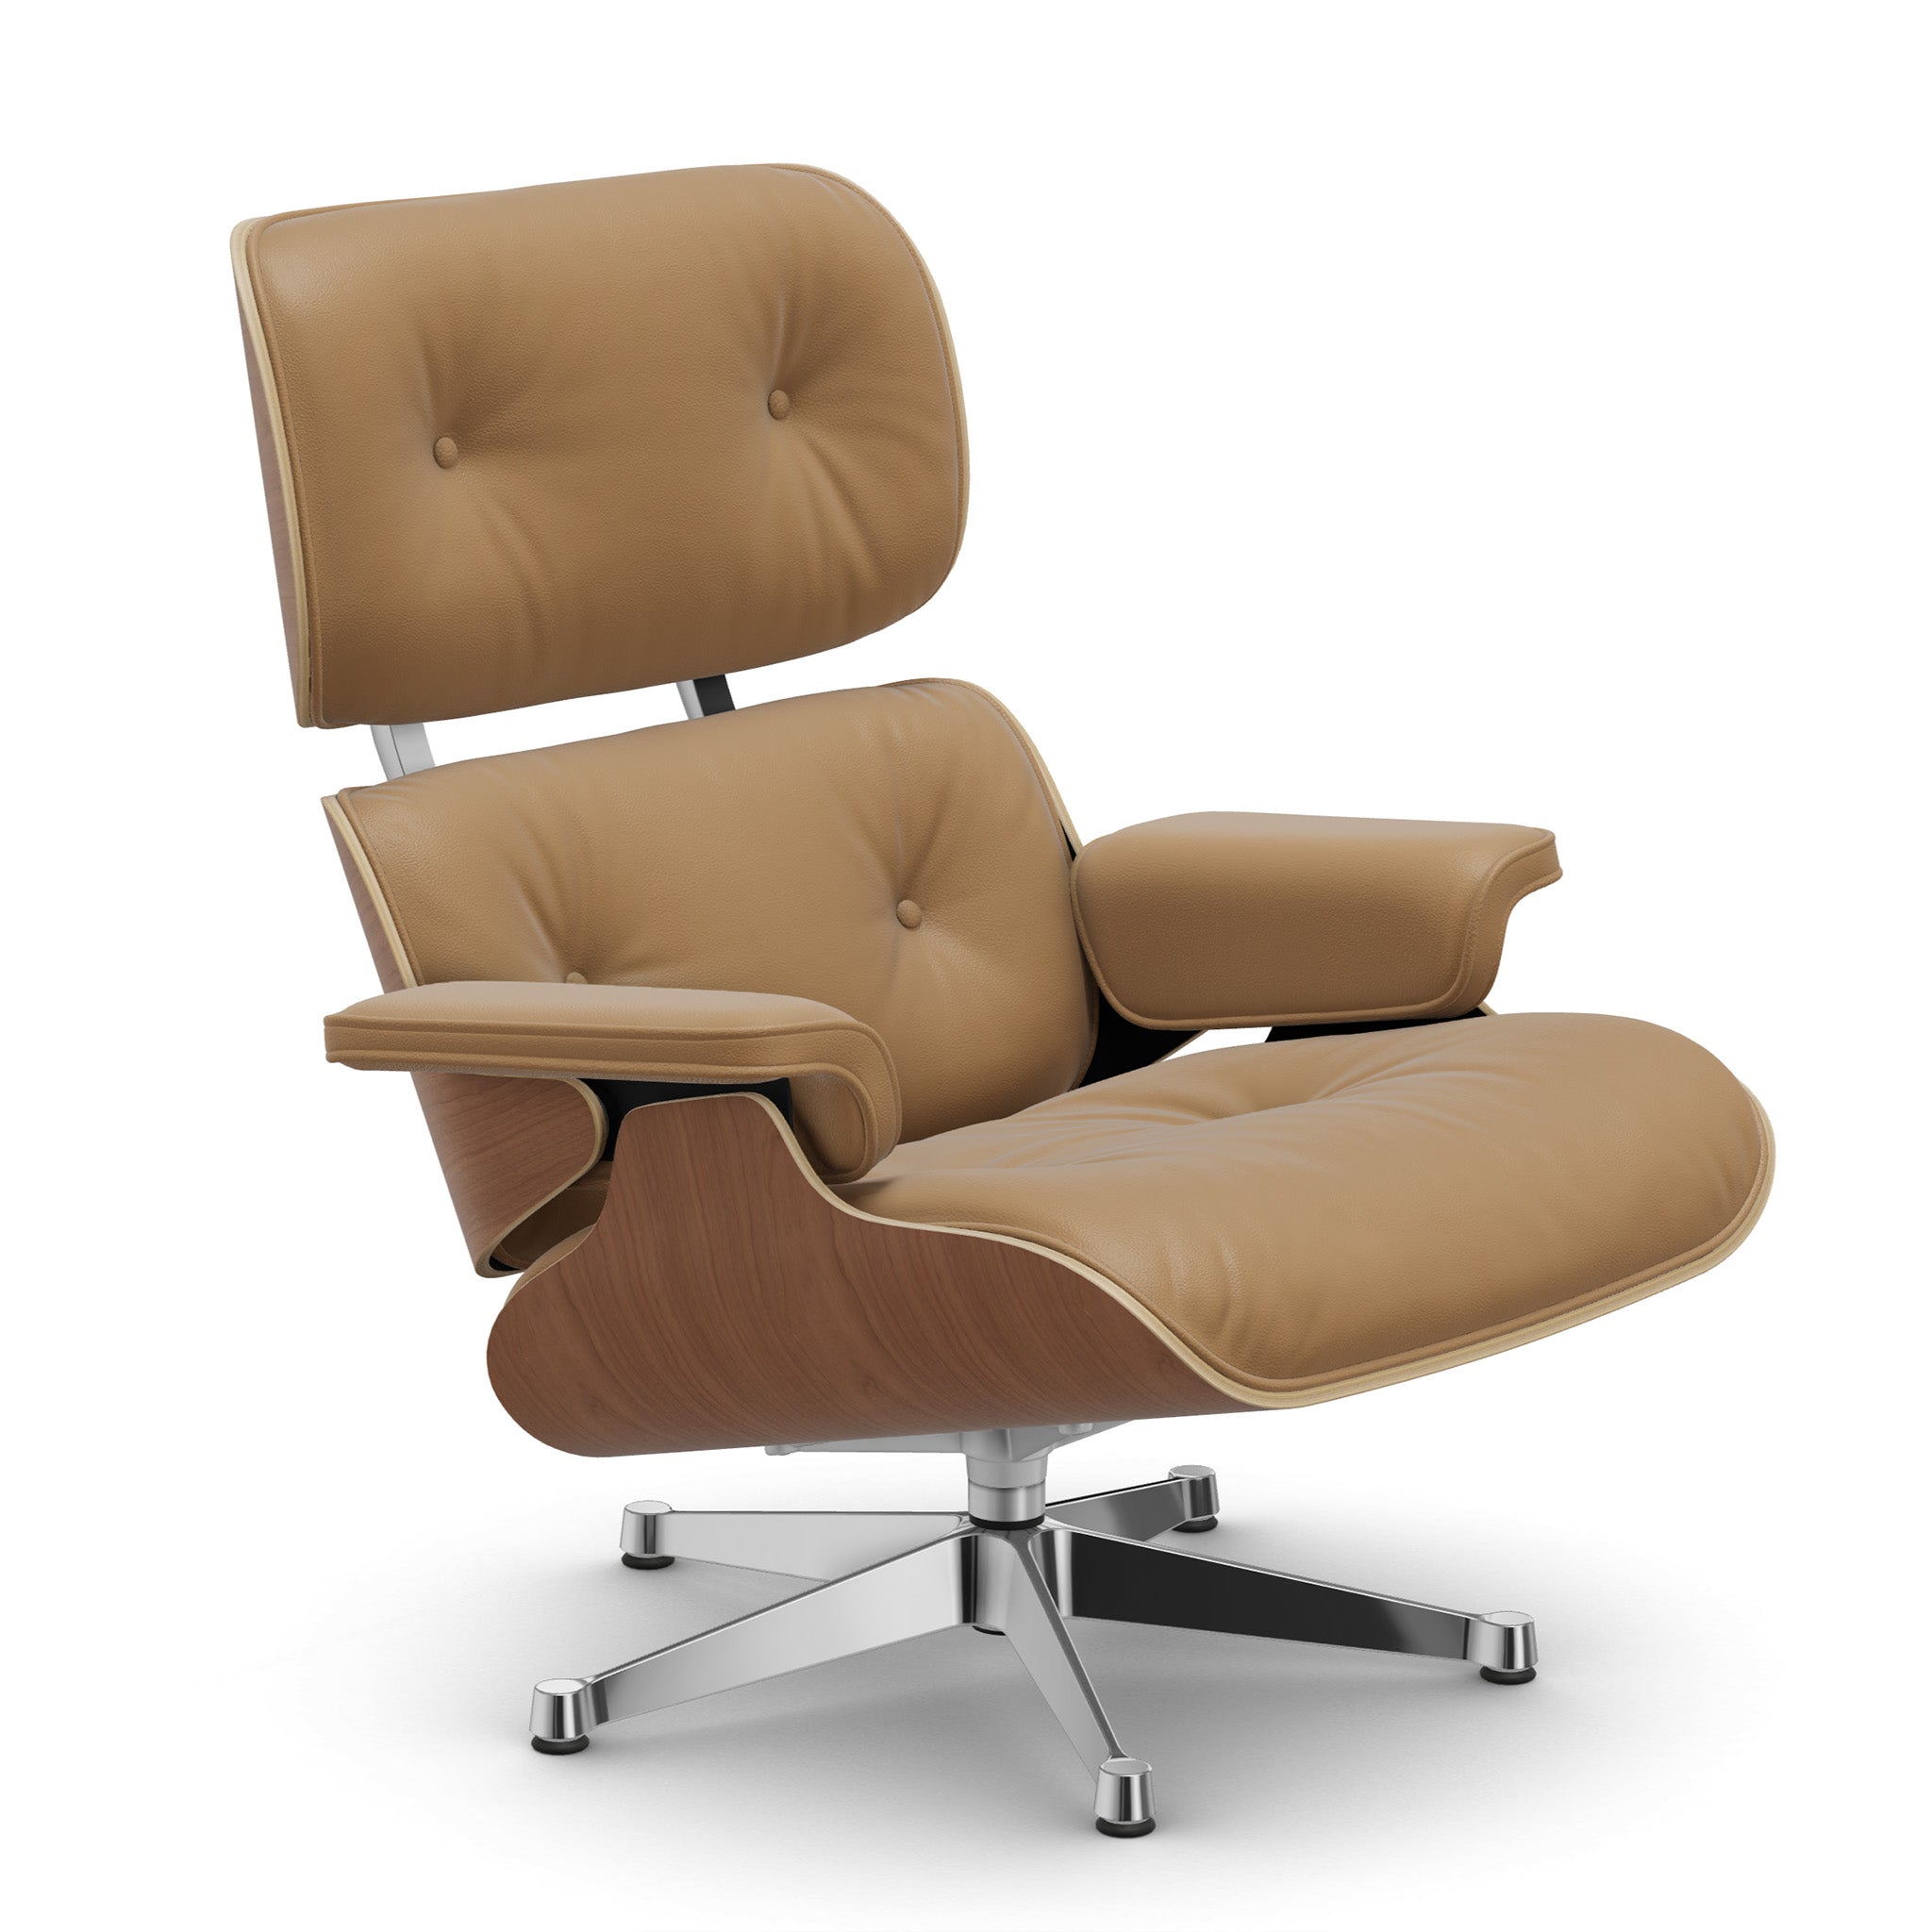 Eames Lounge Chair - New Dimensions by Vitra